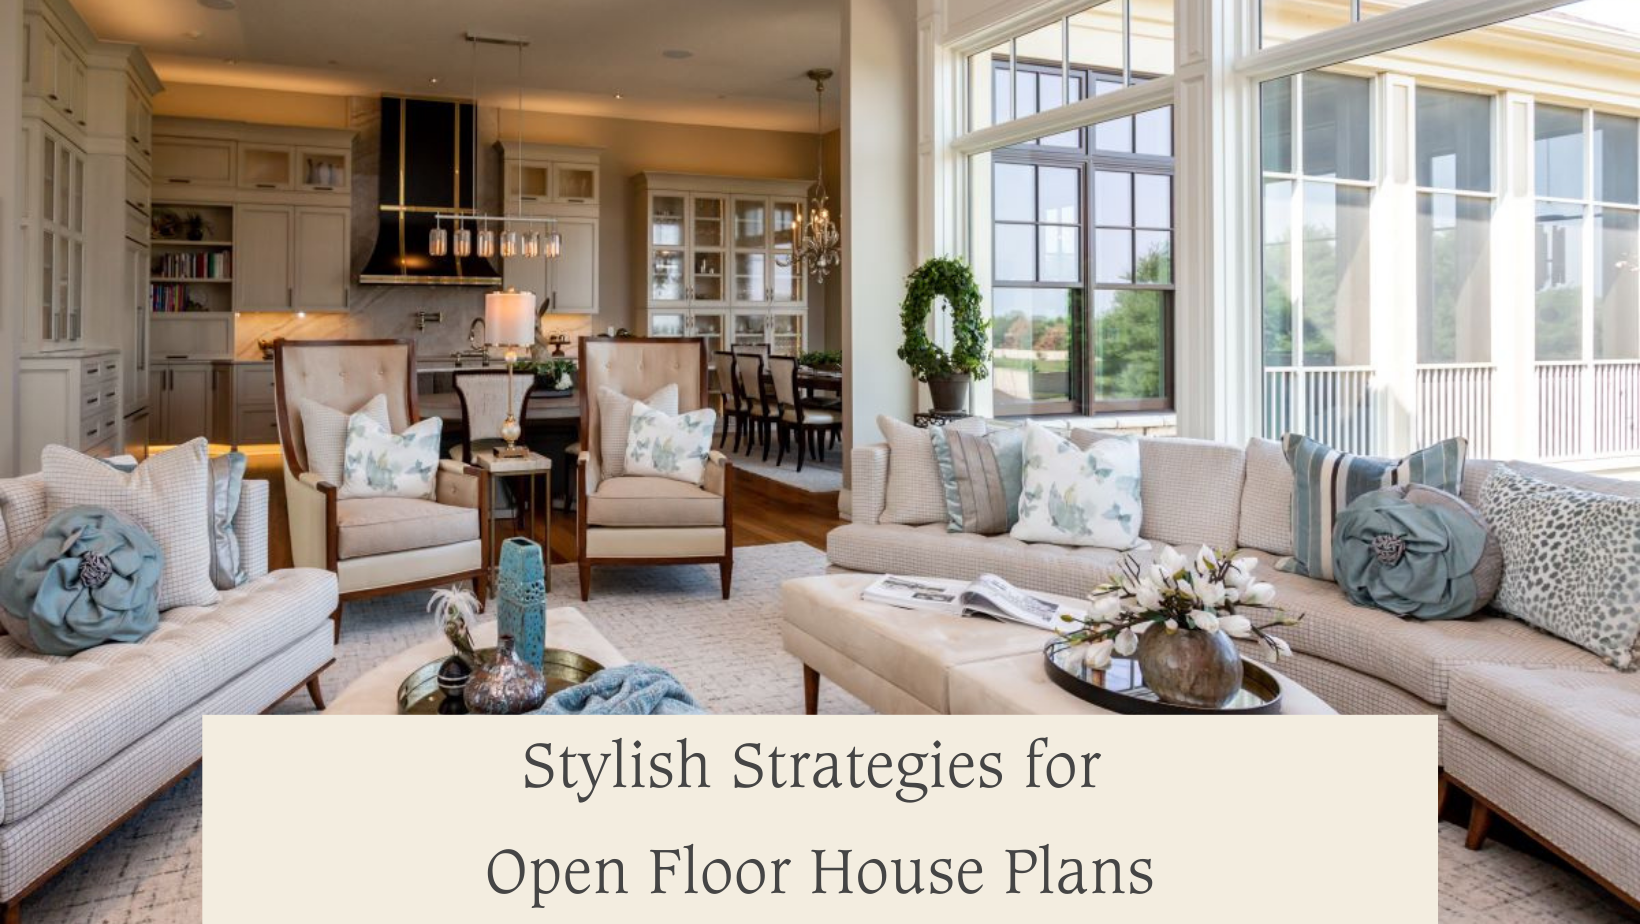 Stylish Strategies for Open Floor House Plans